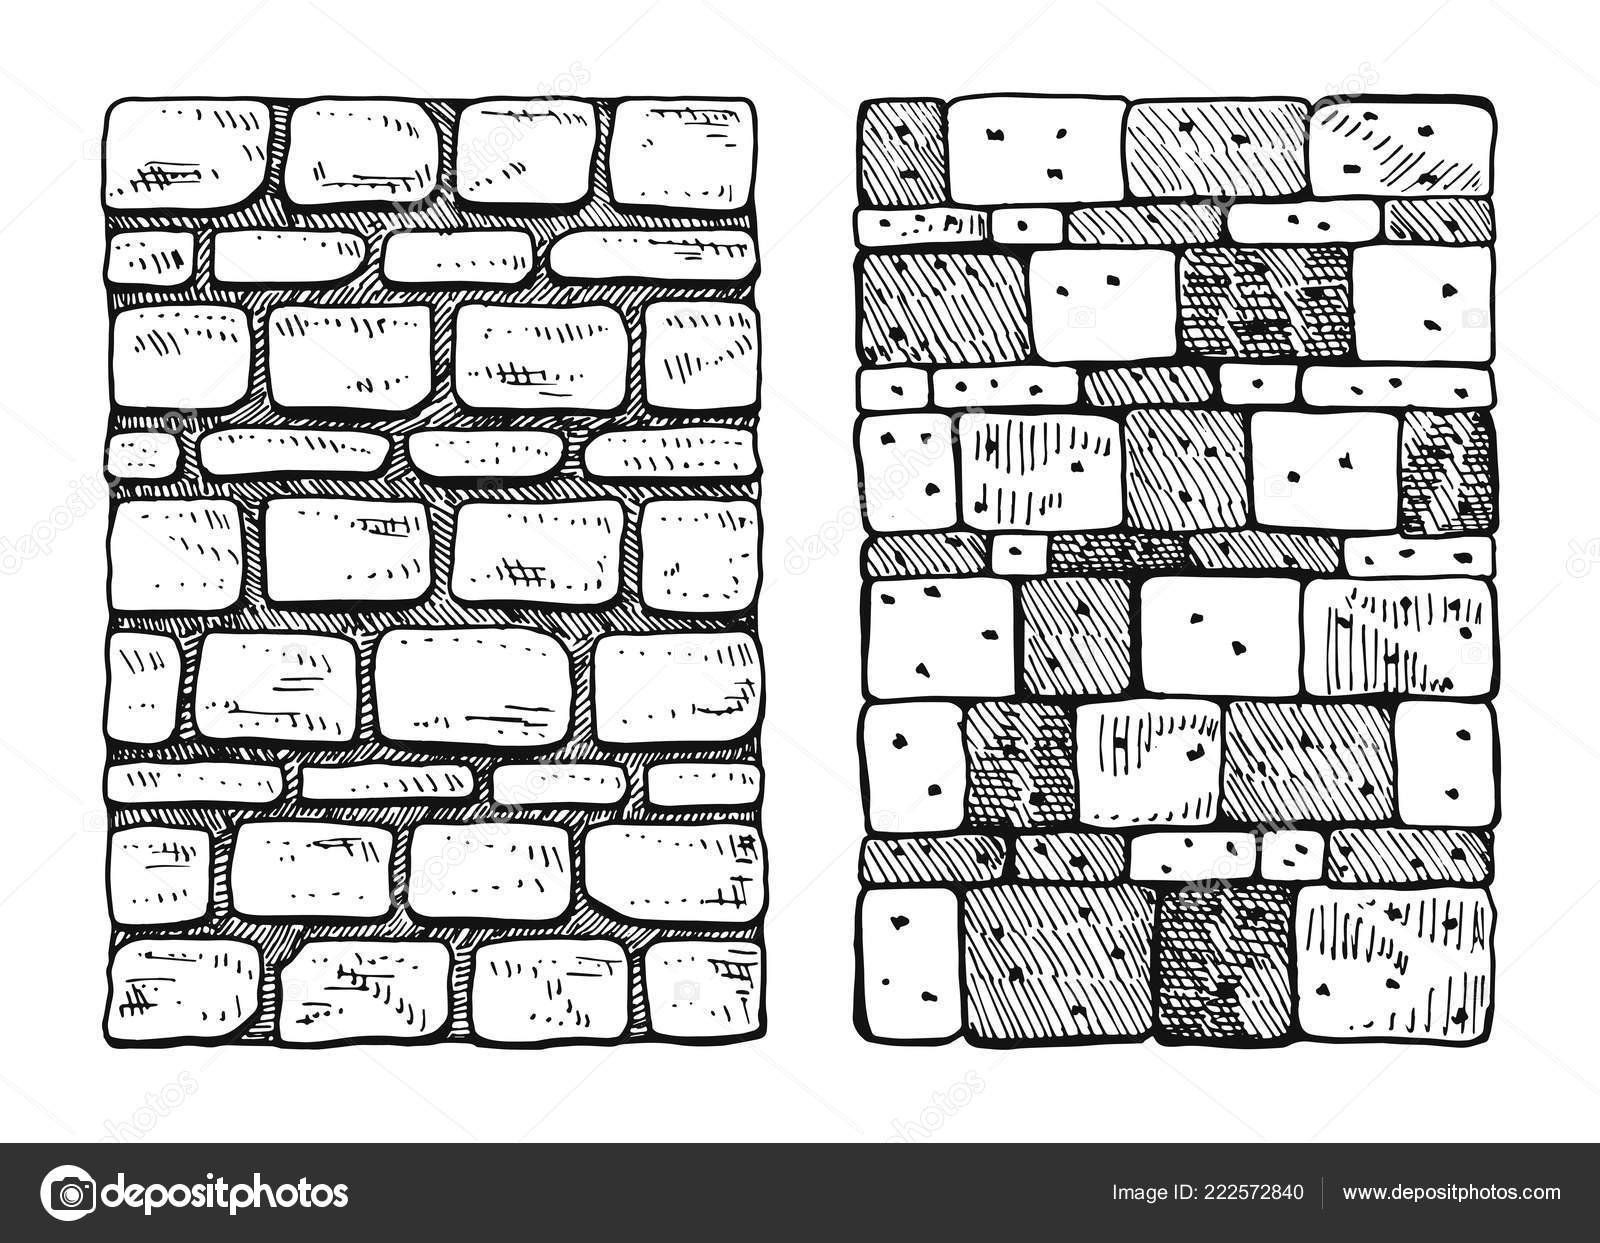 Red brick wall texture drawing free image download